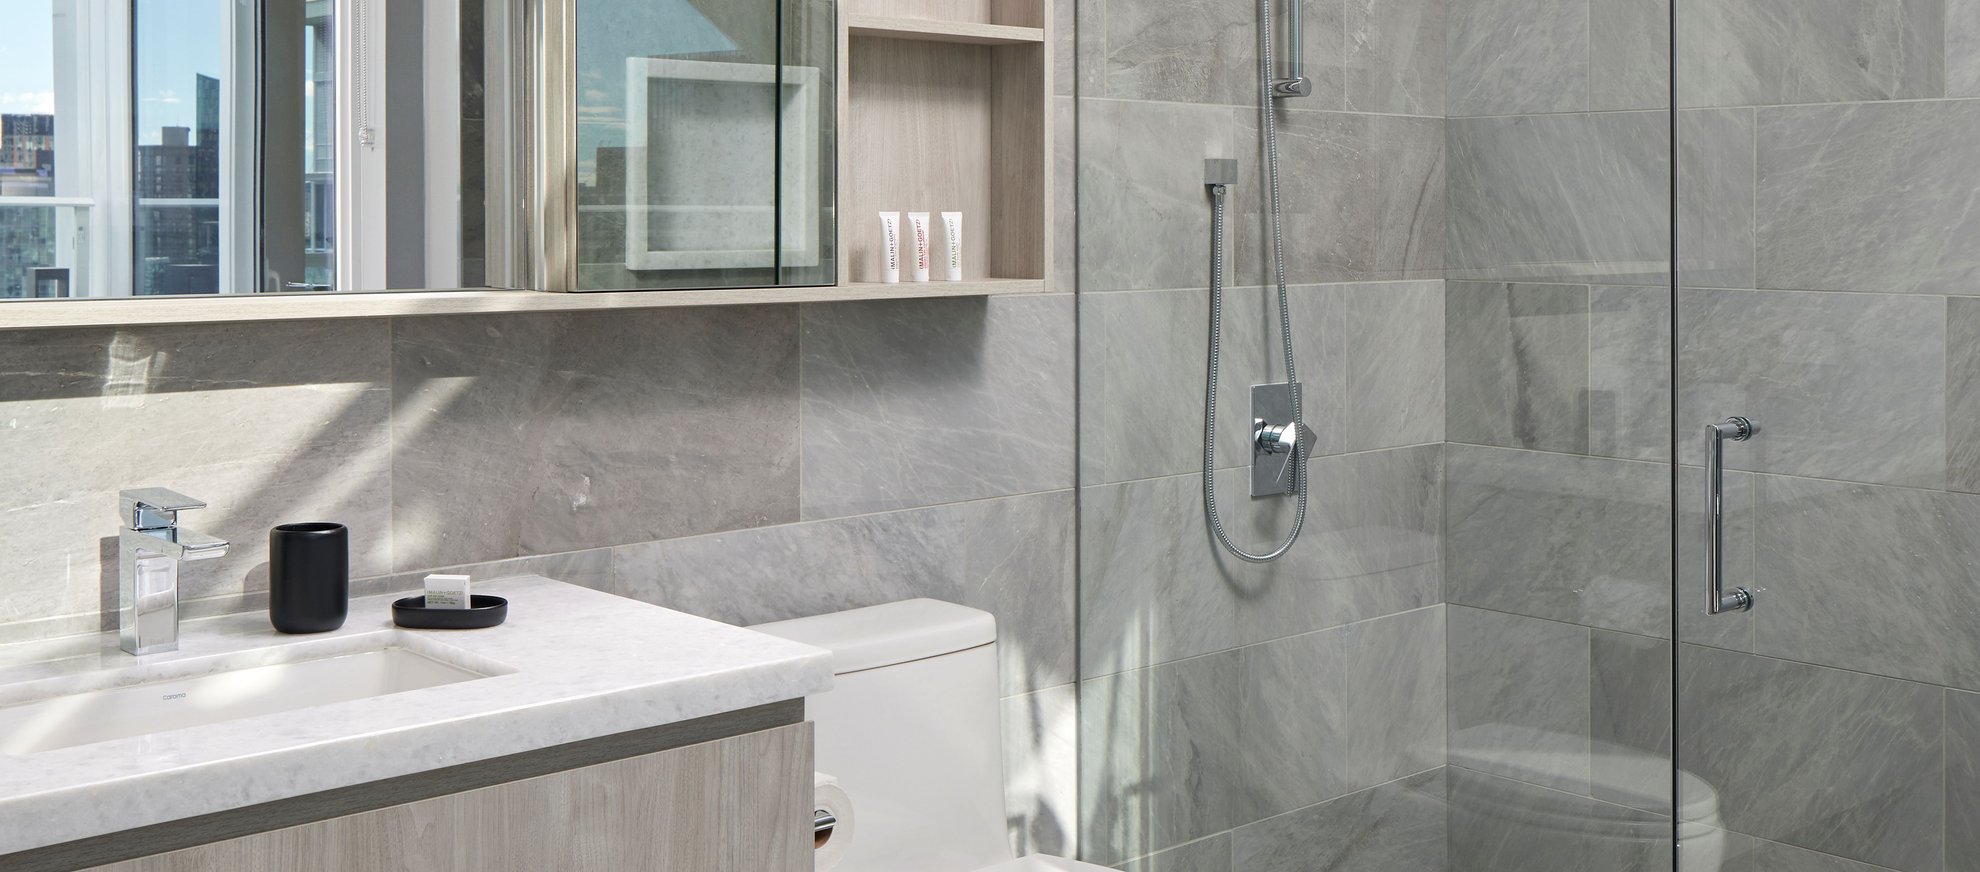 modern luxury bathroom with glass shower and rainfall shower head at the penthouse level south lake union.jpg